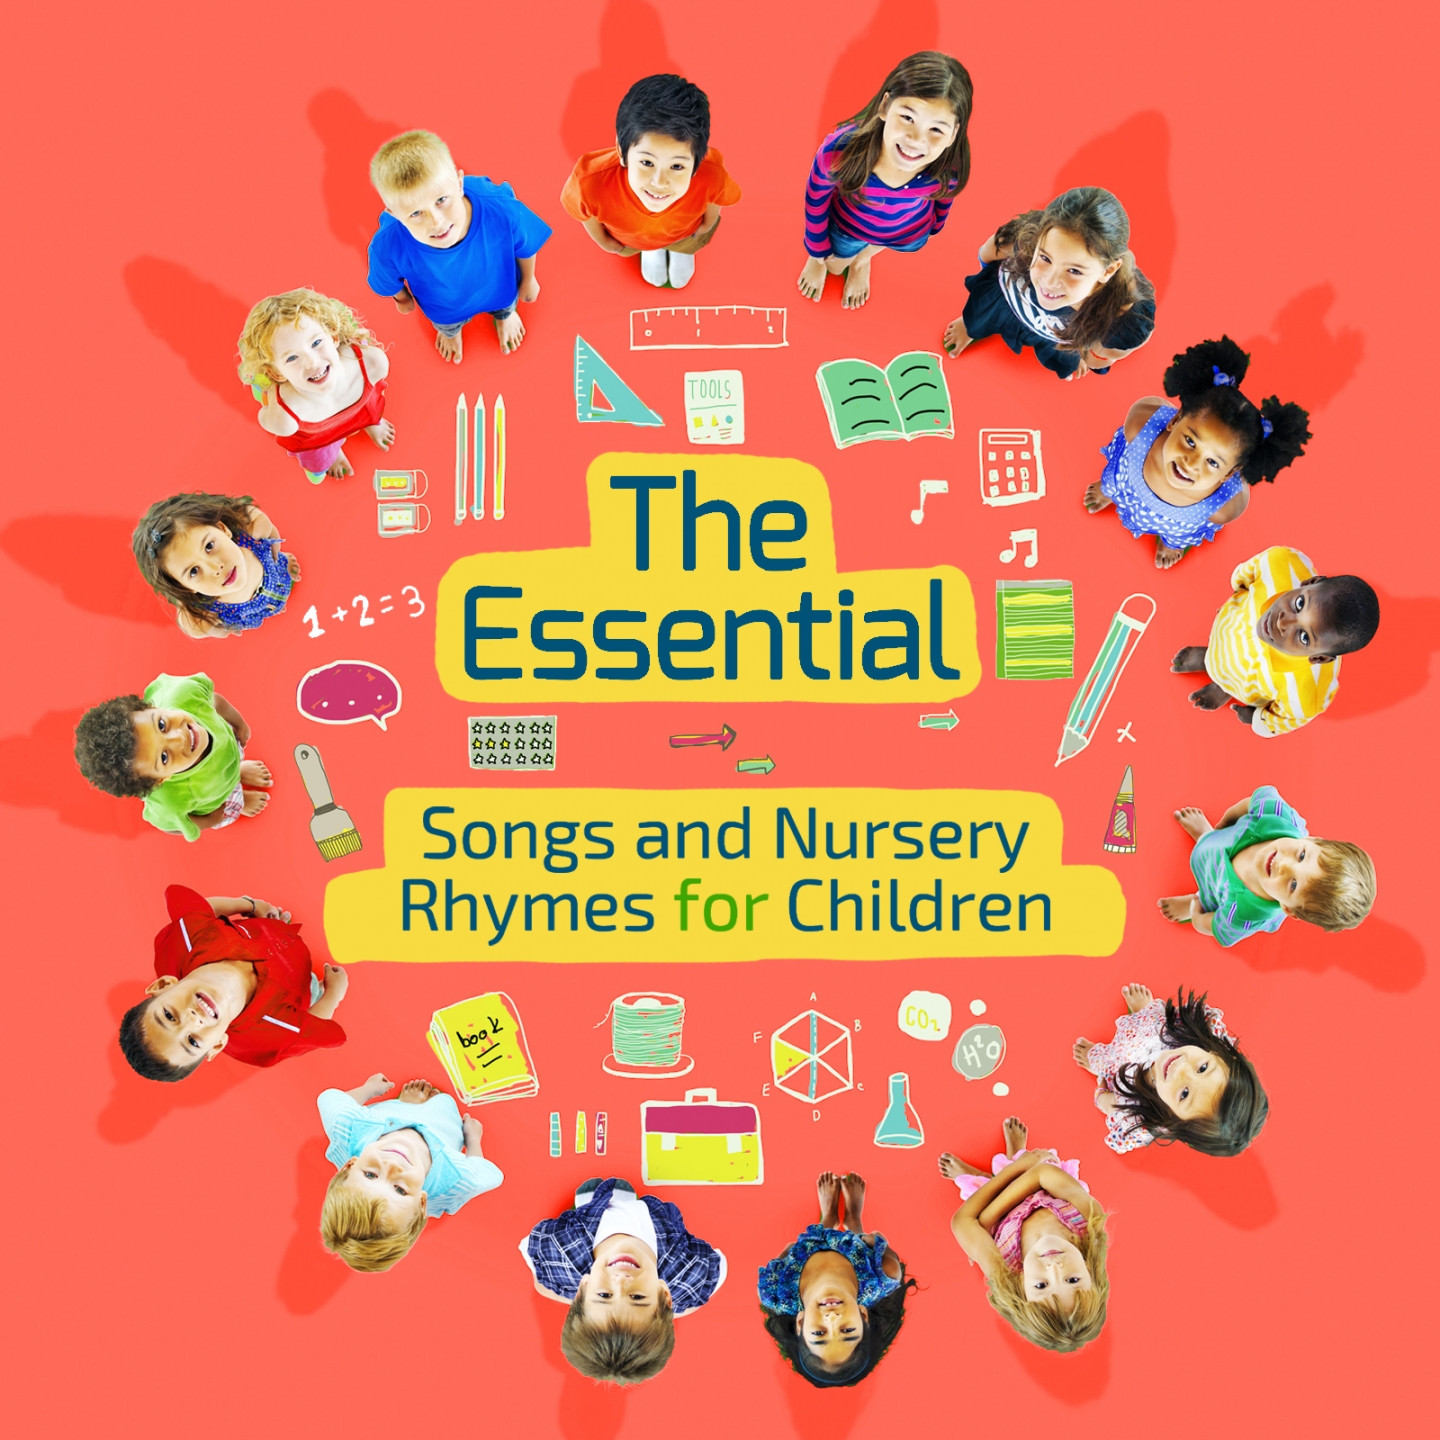 The Essential Songs and Nursery Rhymes for Children (165)